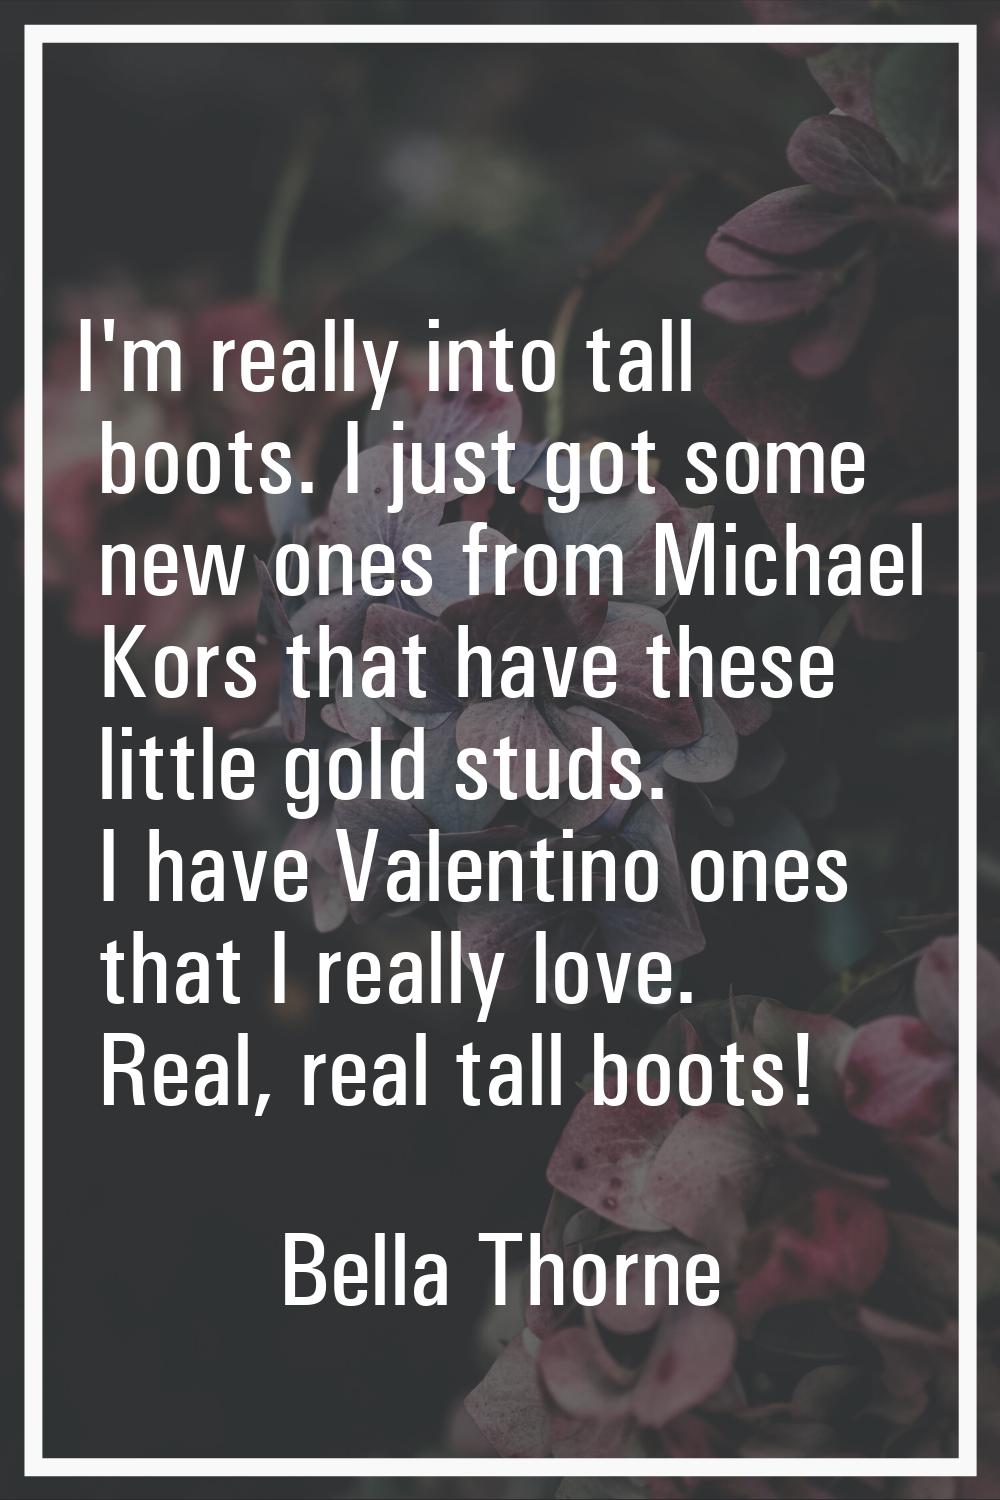 I'm really into tall boots. I just got some new ones from Michael Kors that have these little gold 